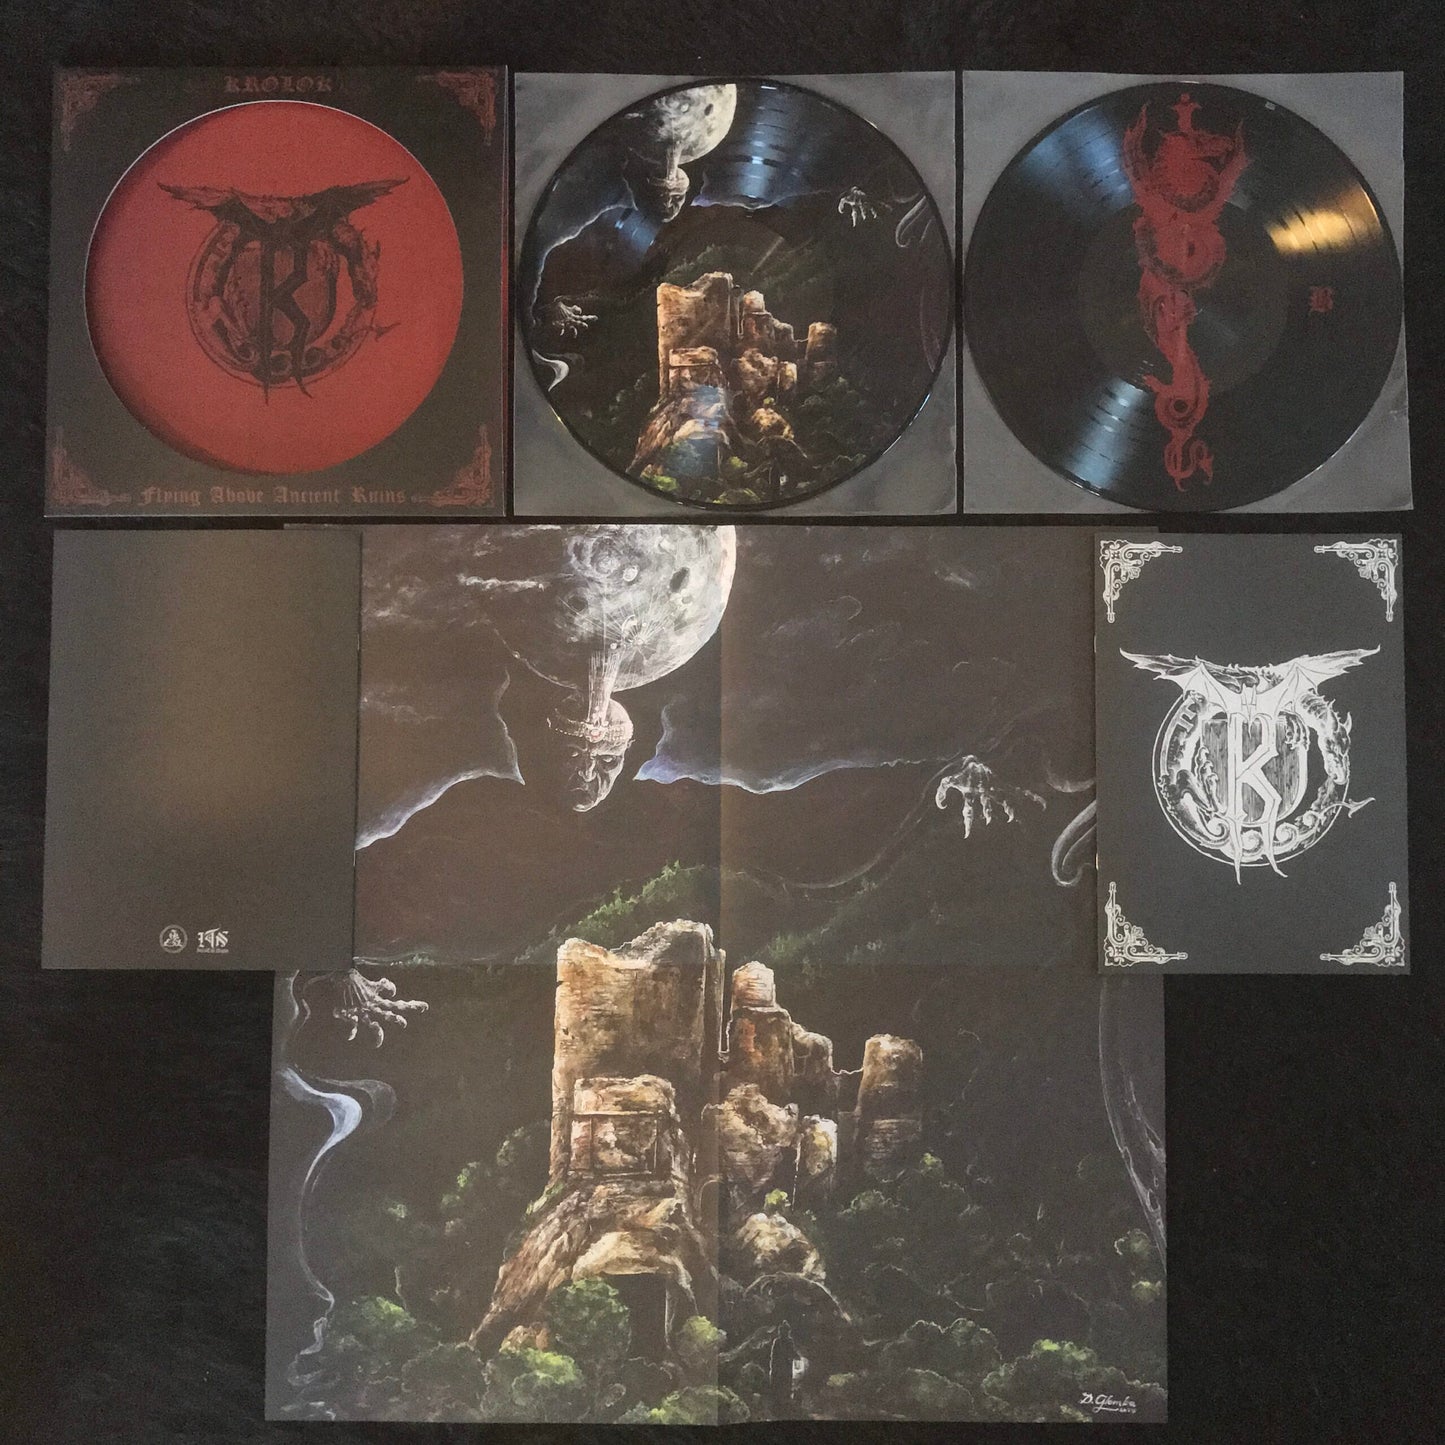 Krolok - Flying Above Ancient Ruins (Pic Disc)